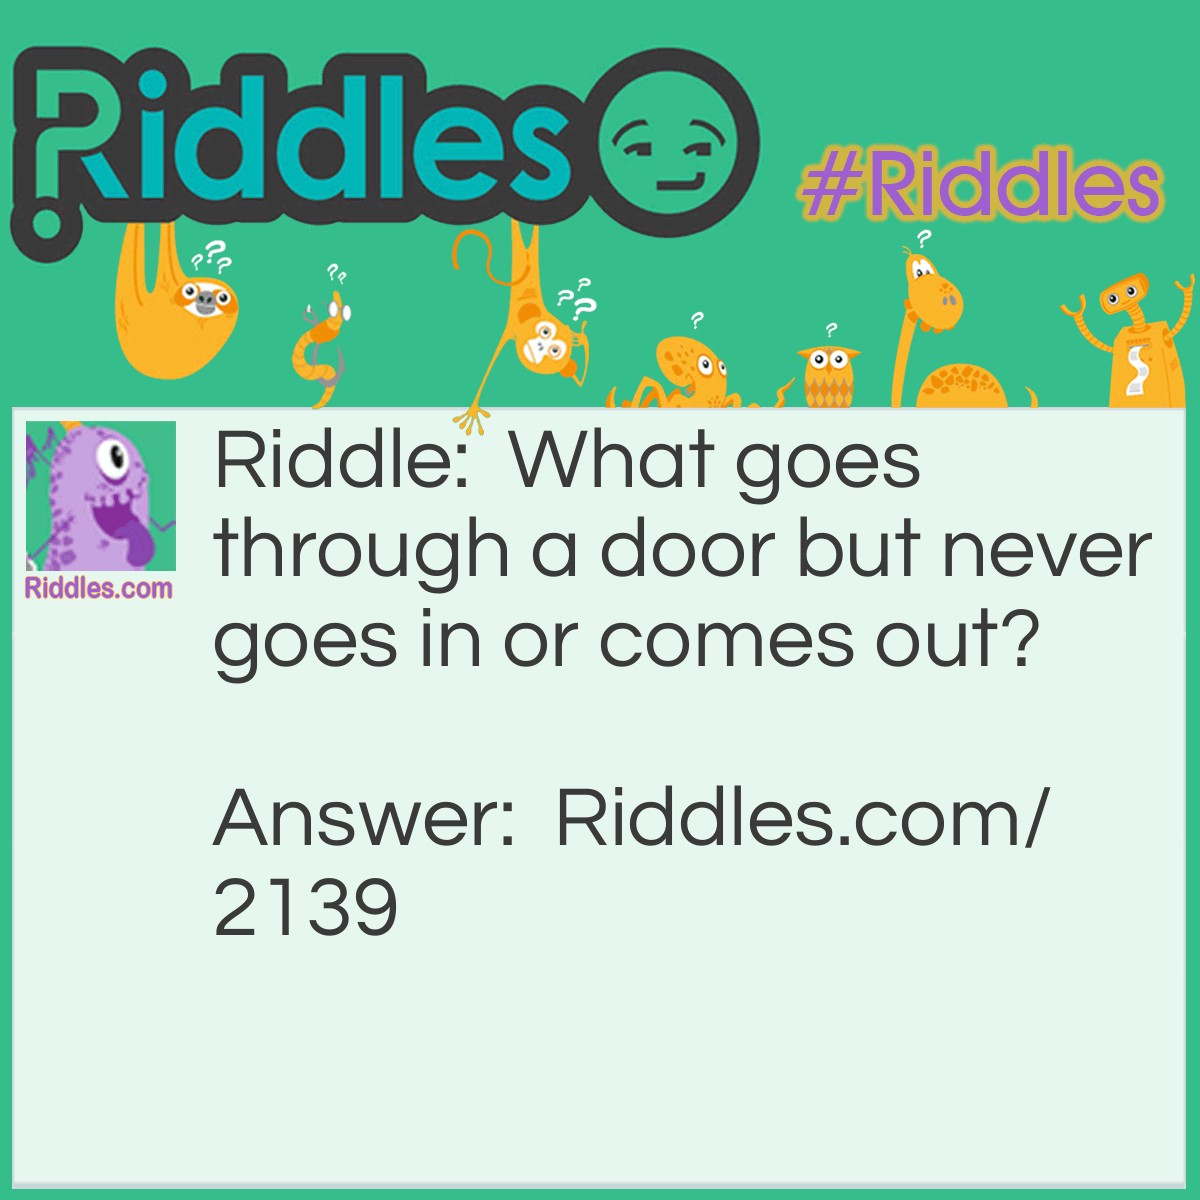 Riddle: What goes through a door but never goes in or comes out? Answer: A keyhole.